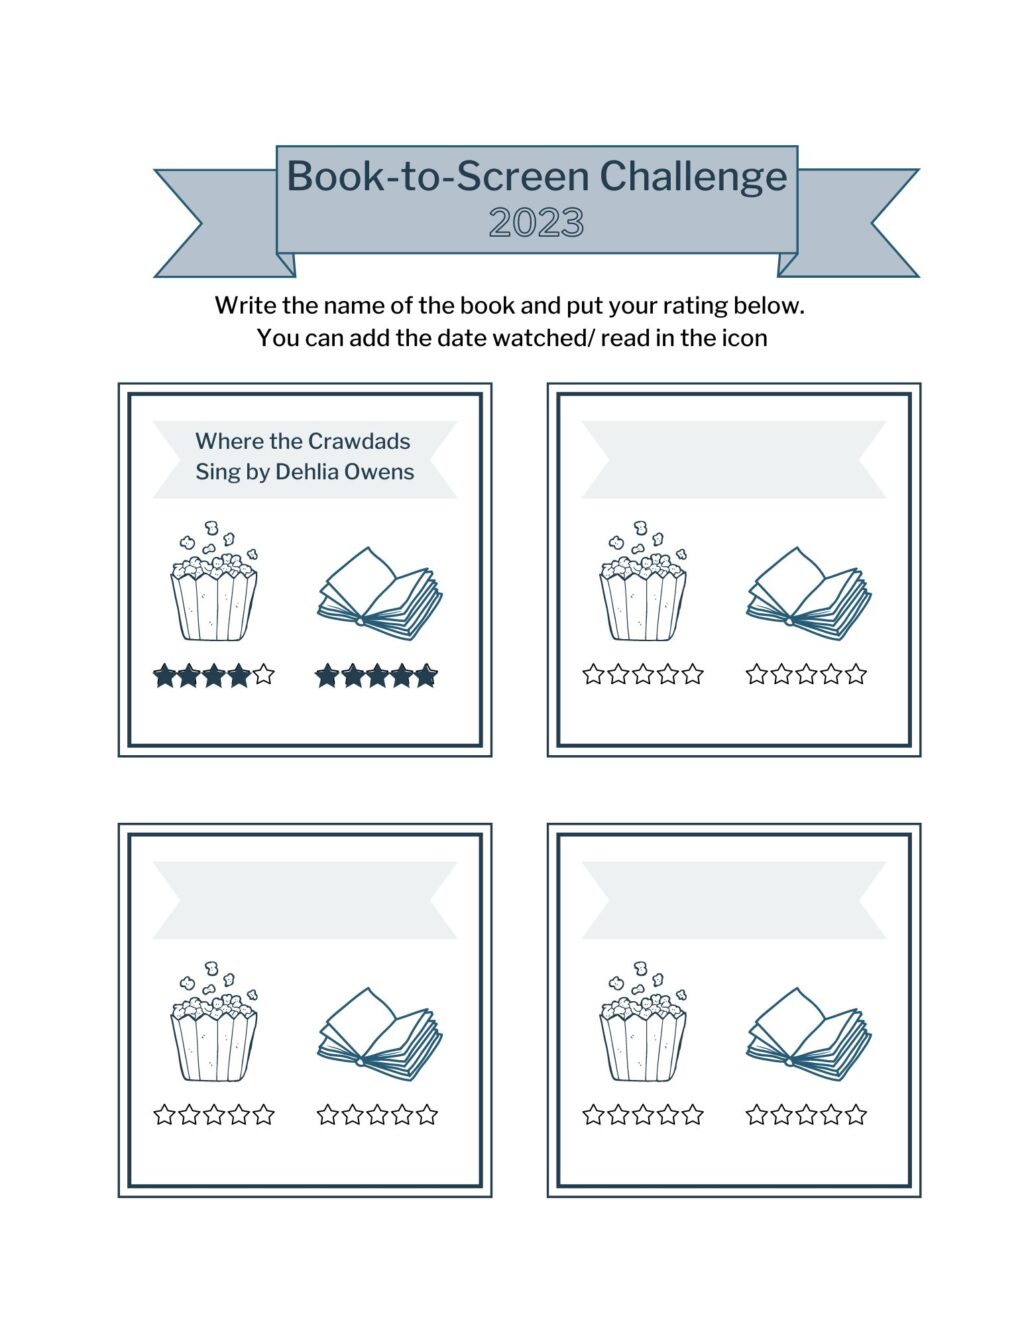 book to screen image